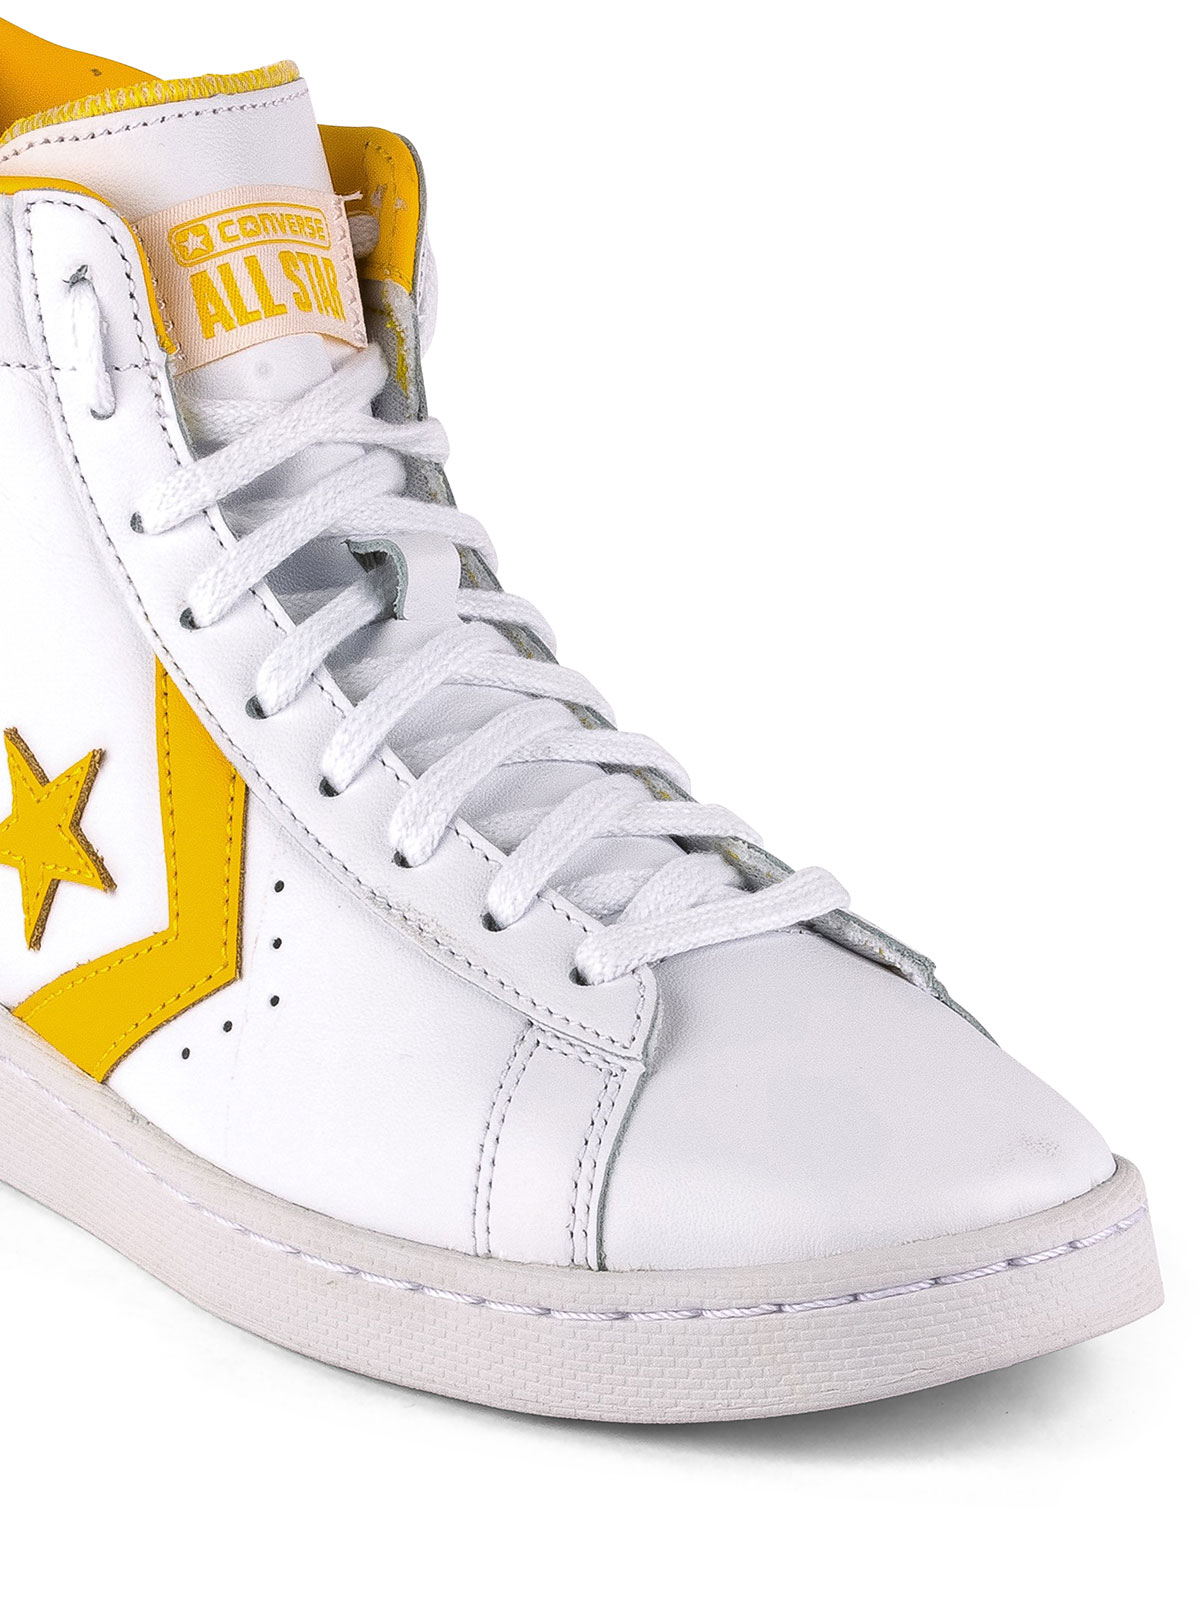 Converse - Pro Leather high top 